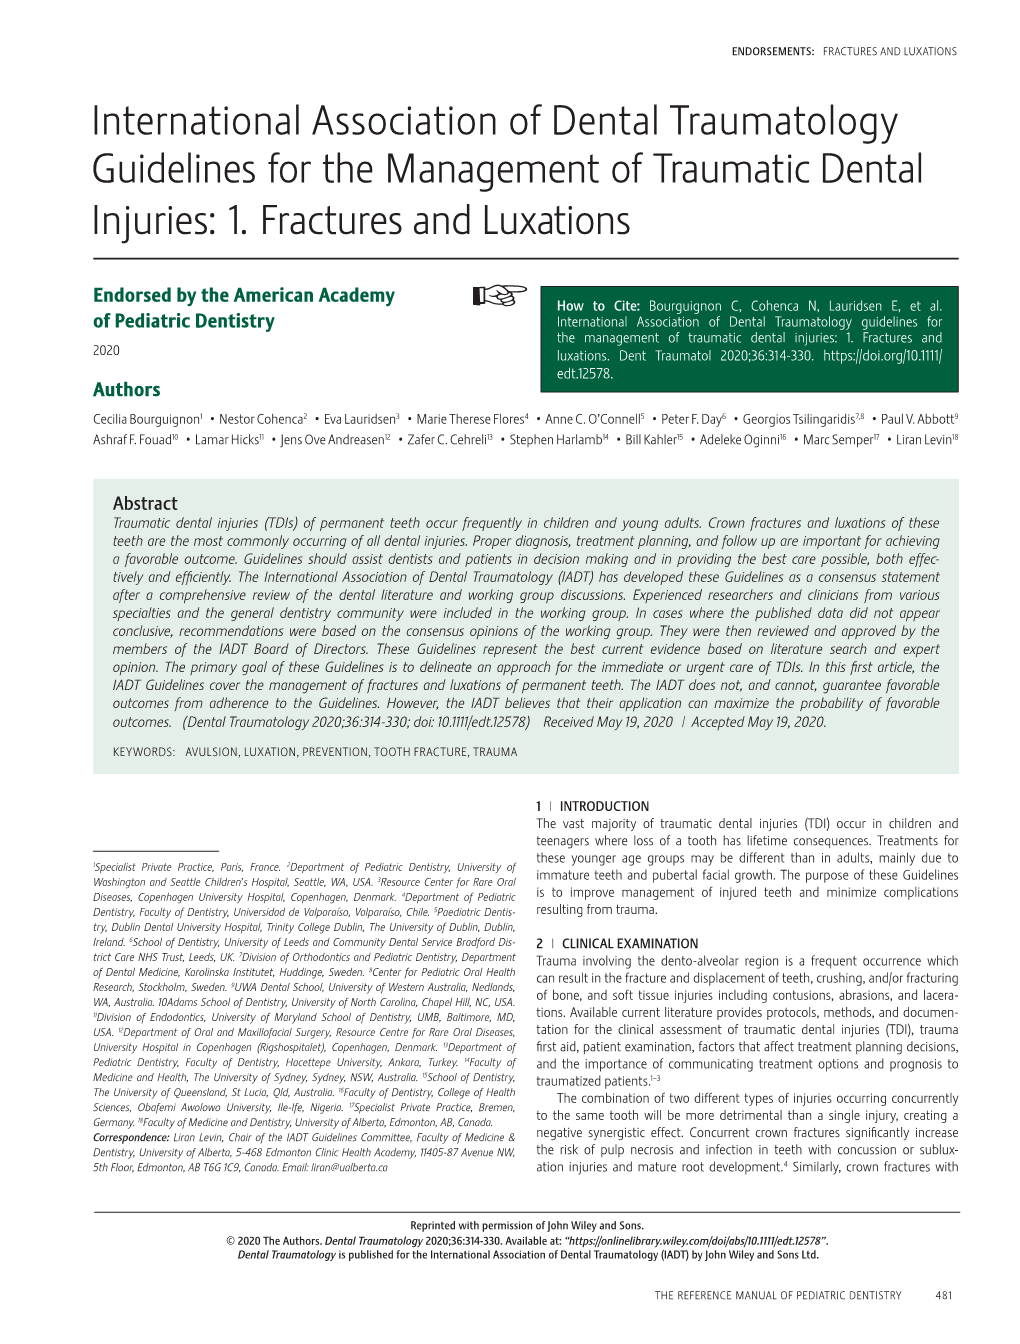 Guidelines for Management of Traumatic Dental Injuries